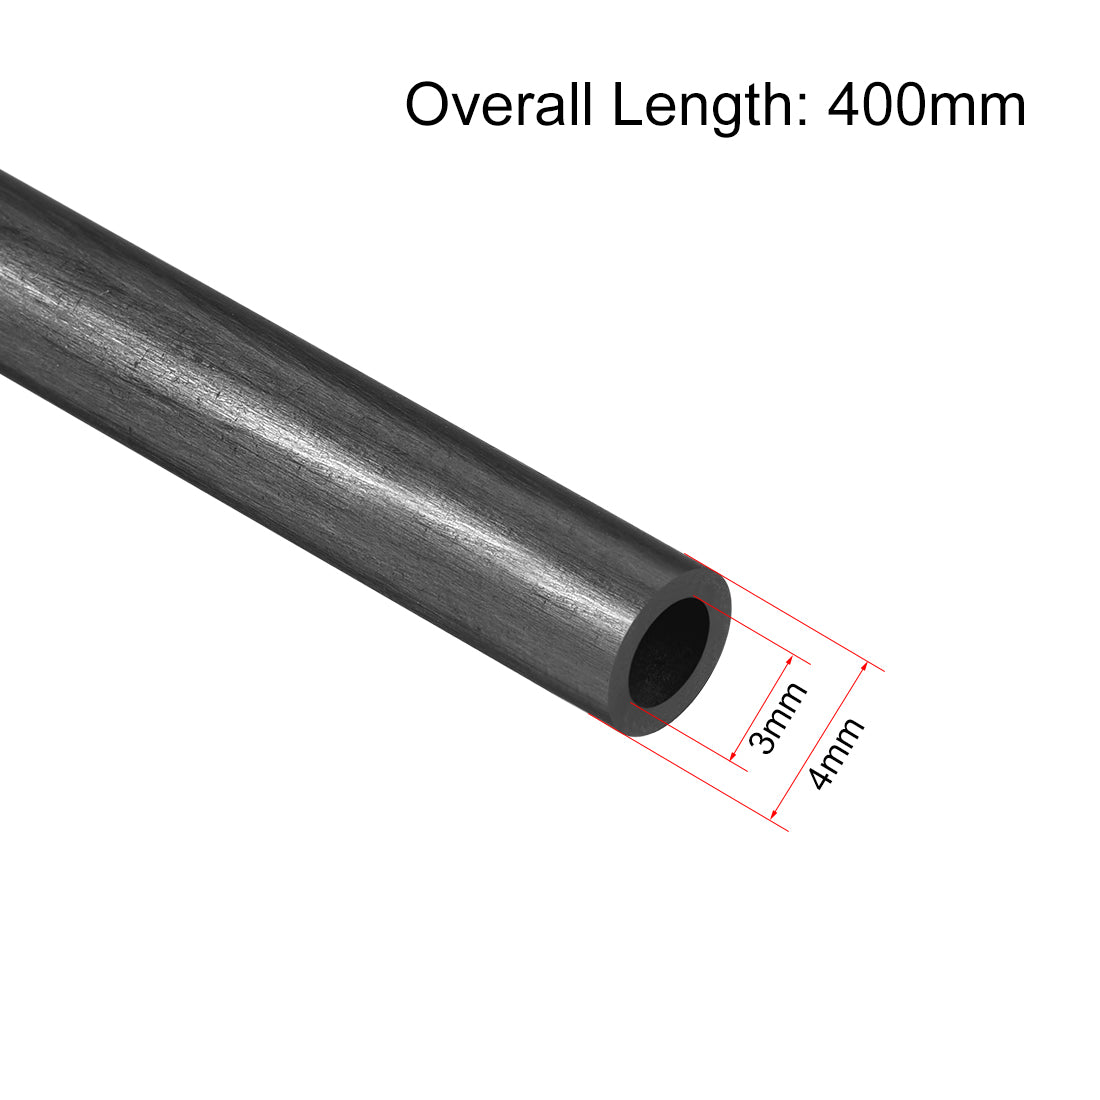 uxcell Uxcell Carbon Fiber Round Tube 4mm x 3mm x 400mm Carbon Fiber Wing Pultrusion Tubing for RC Airplane Quadcopter 3 Pcs